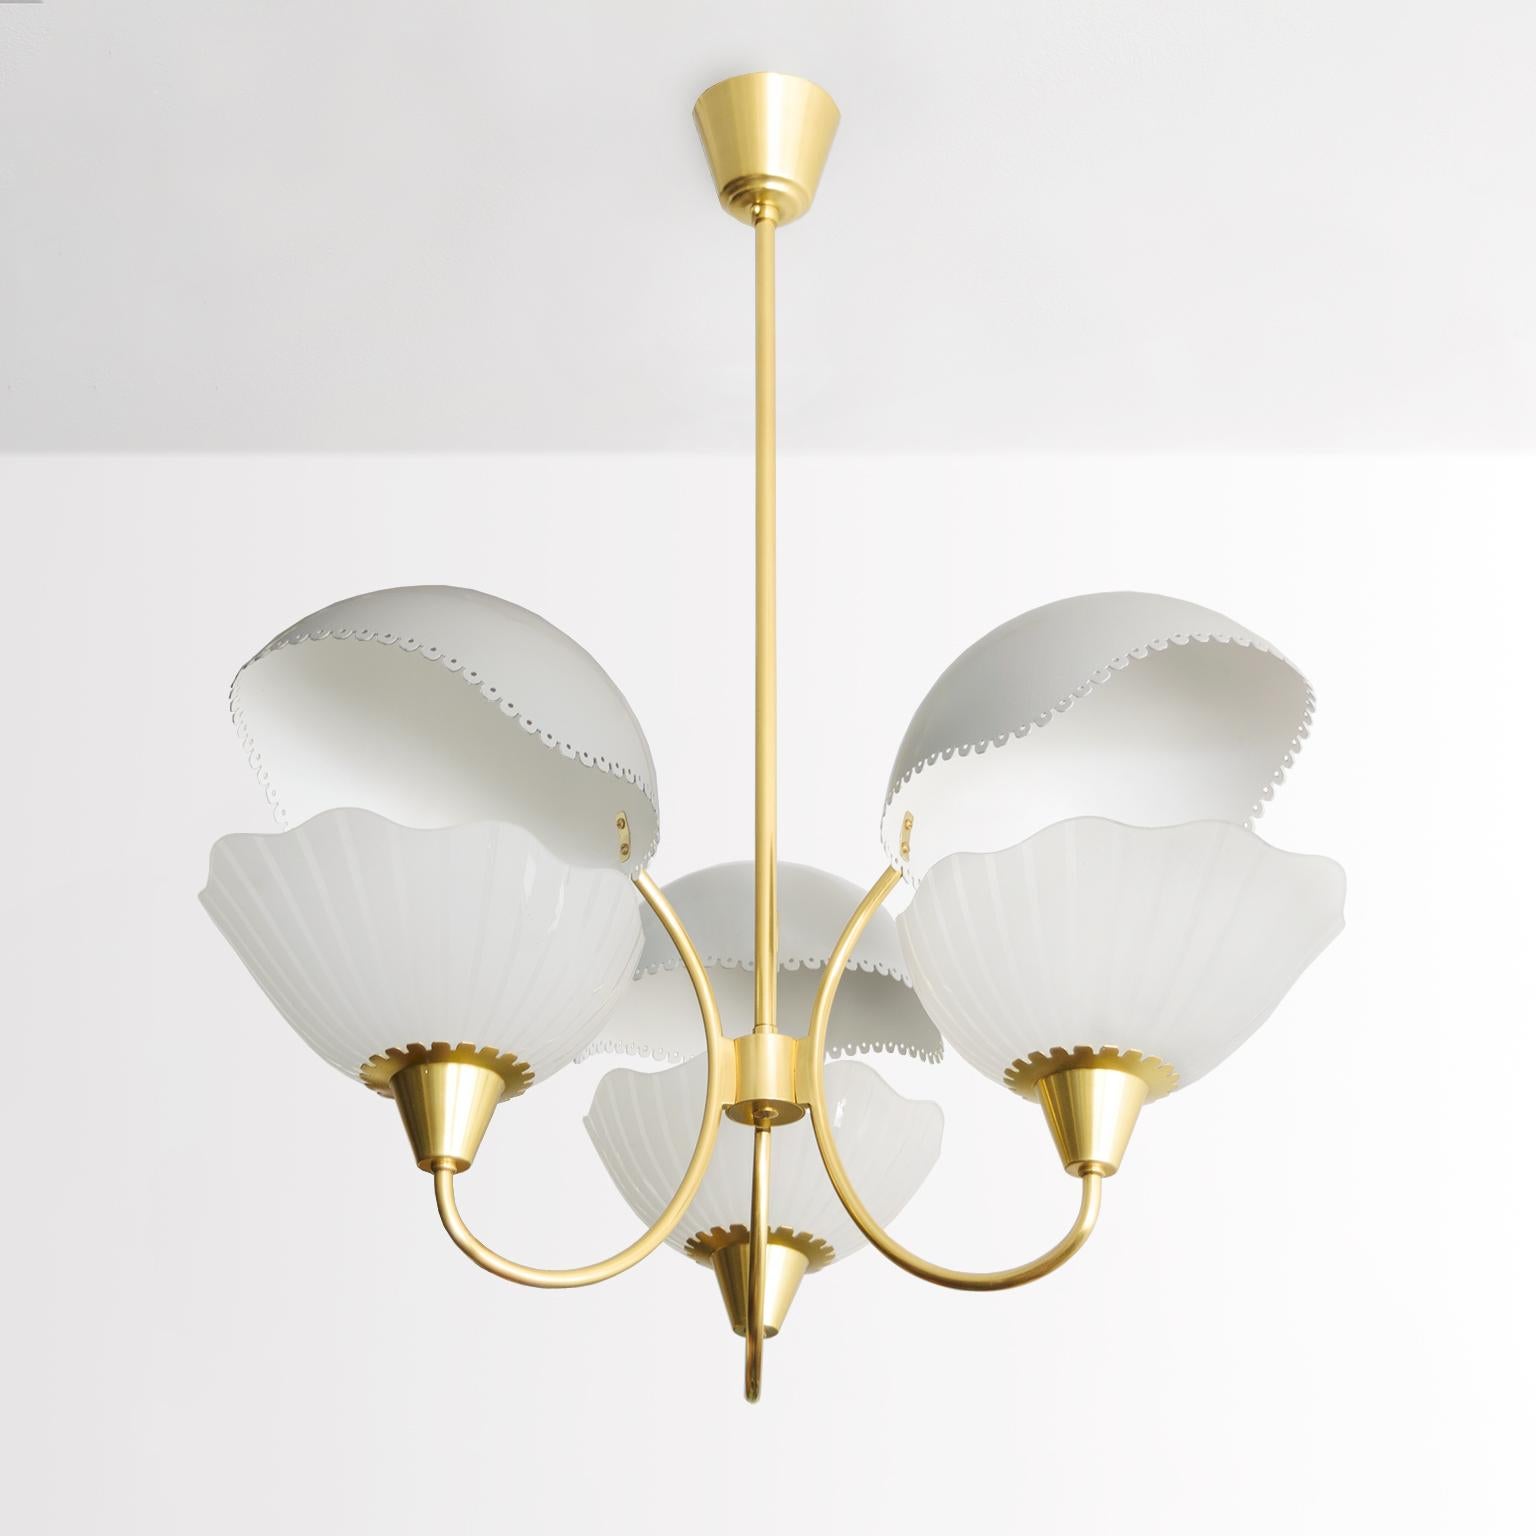 Harald Notini designed for Orrefors 1940’s chandelier with 3 striped etched shades and 3 lacquered in white and gray reflector shades. The brass frame has been newly polished and lacquered and the fixture has be newly rewired with standard base